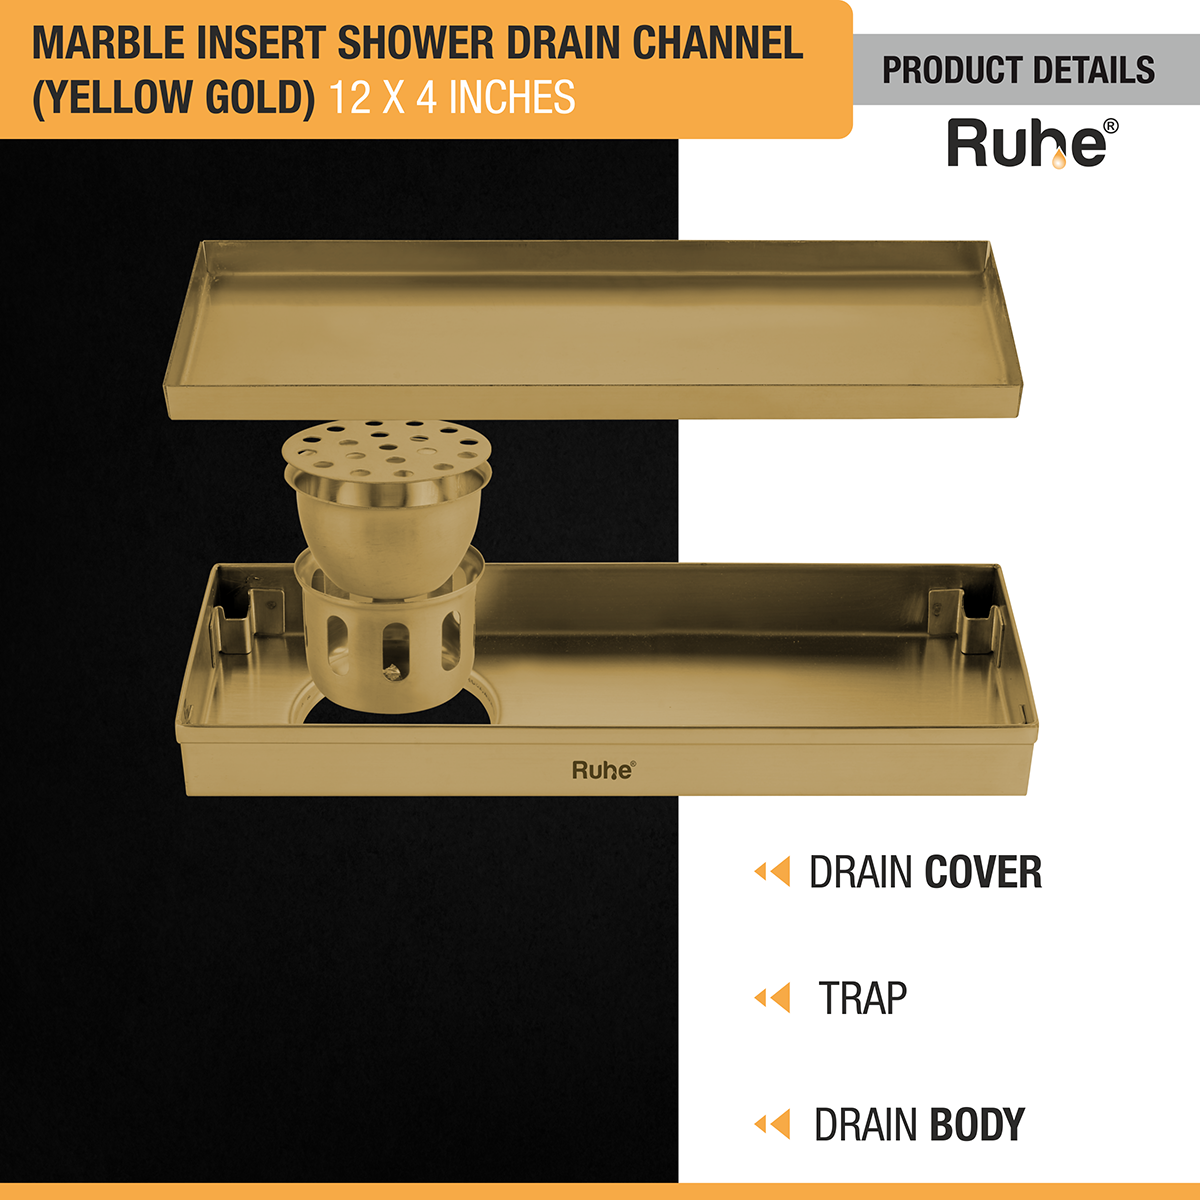 Marble Insert Shower Drain Channel (12 x 4 Inches) YELLOW GOLD PVD Coated with drain cover, trap, and drain body